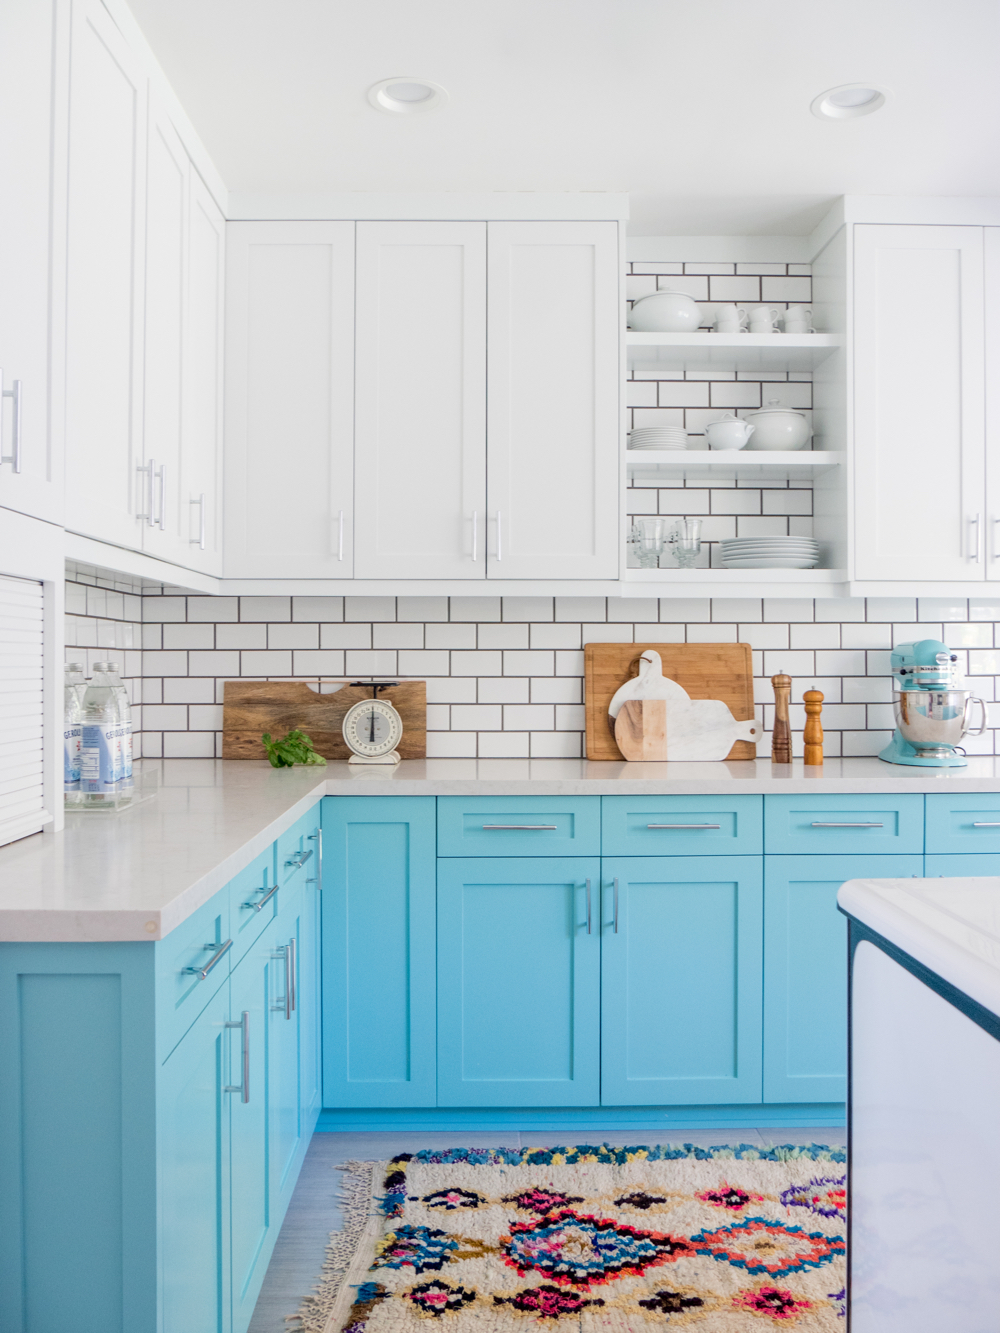 20 Gorgeous Kitchen Cabinet Color Ideas for Every Type of Kitchen